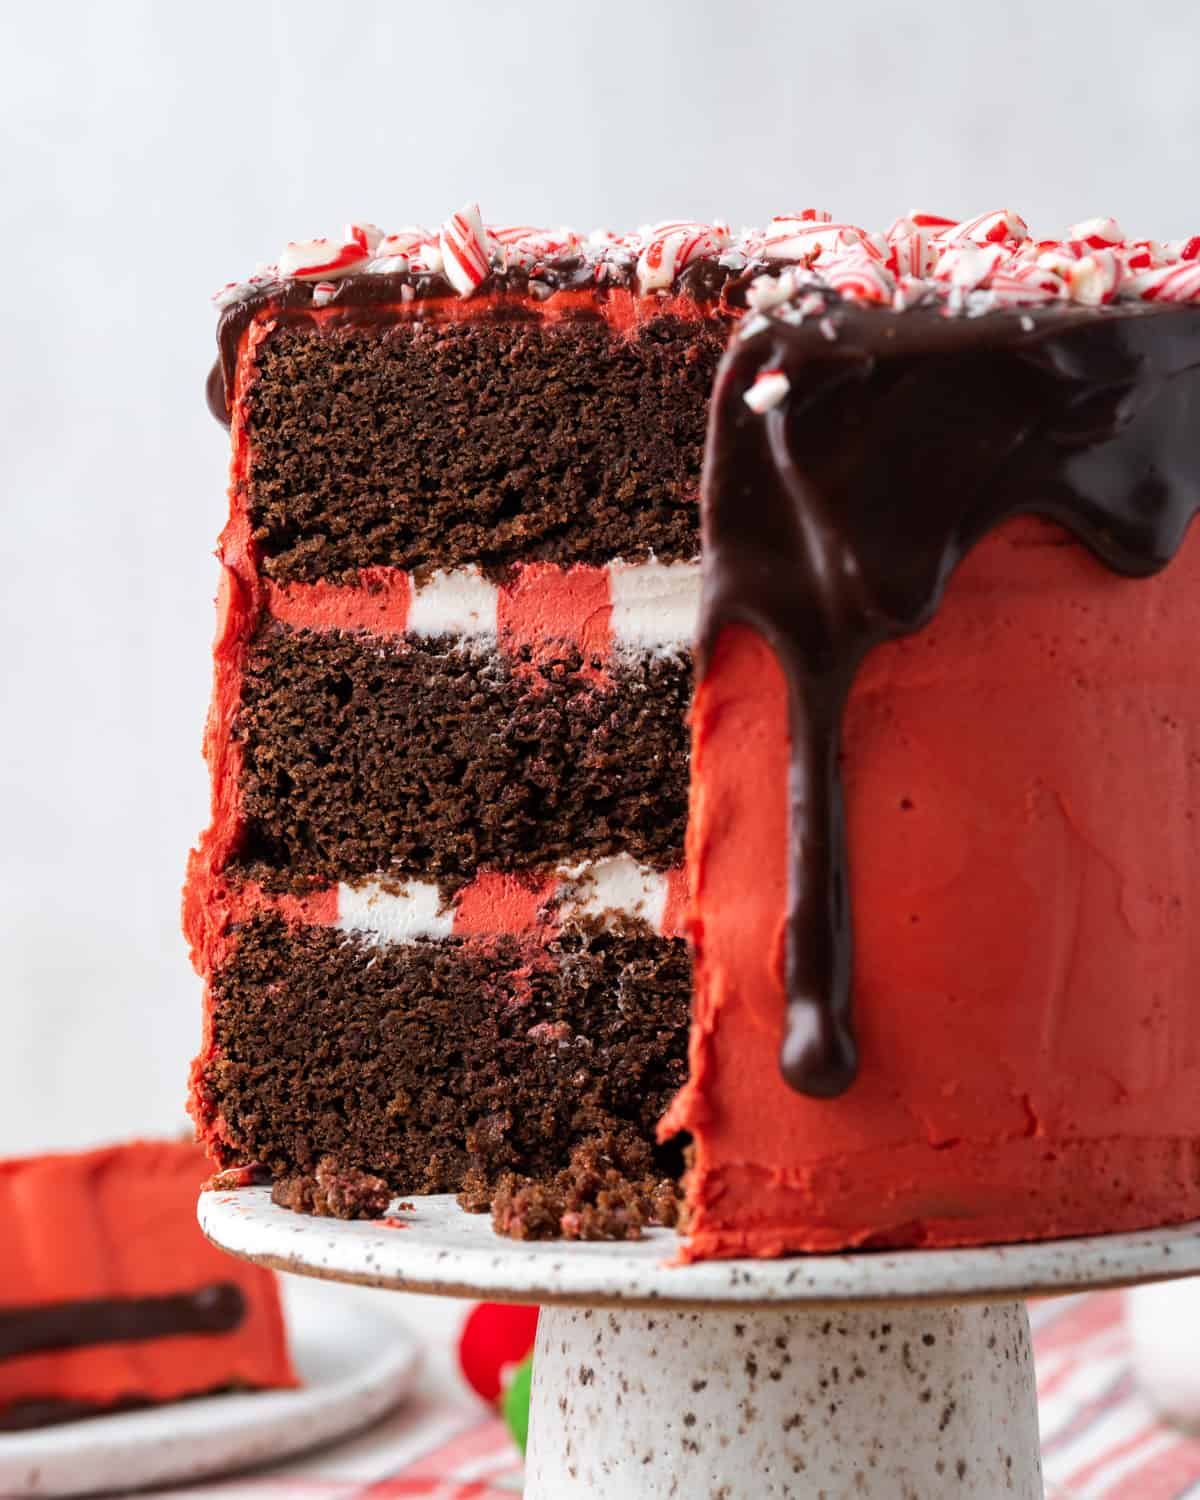 The interior of the chocolate peppermint cake showing three chocolate layers with red and white striped buttercream frosting.